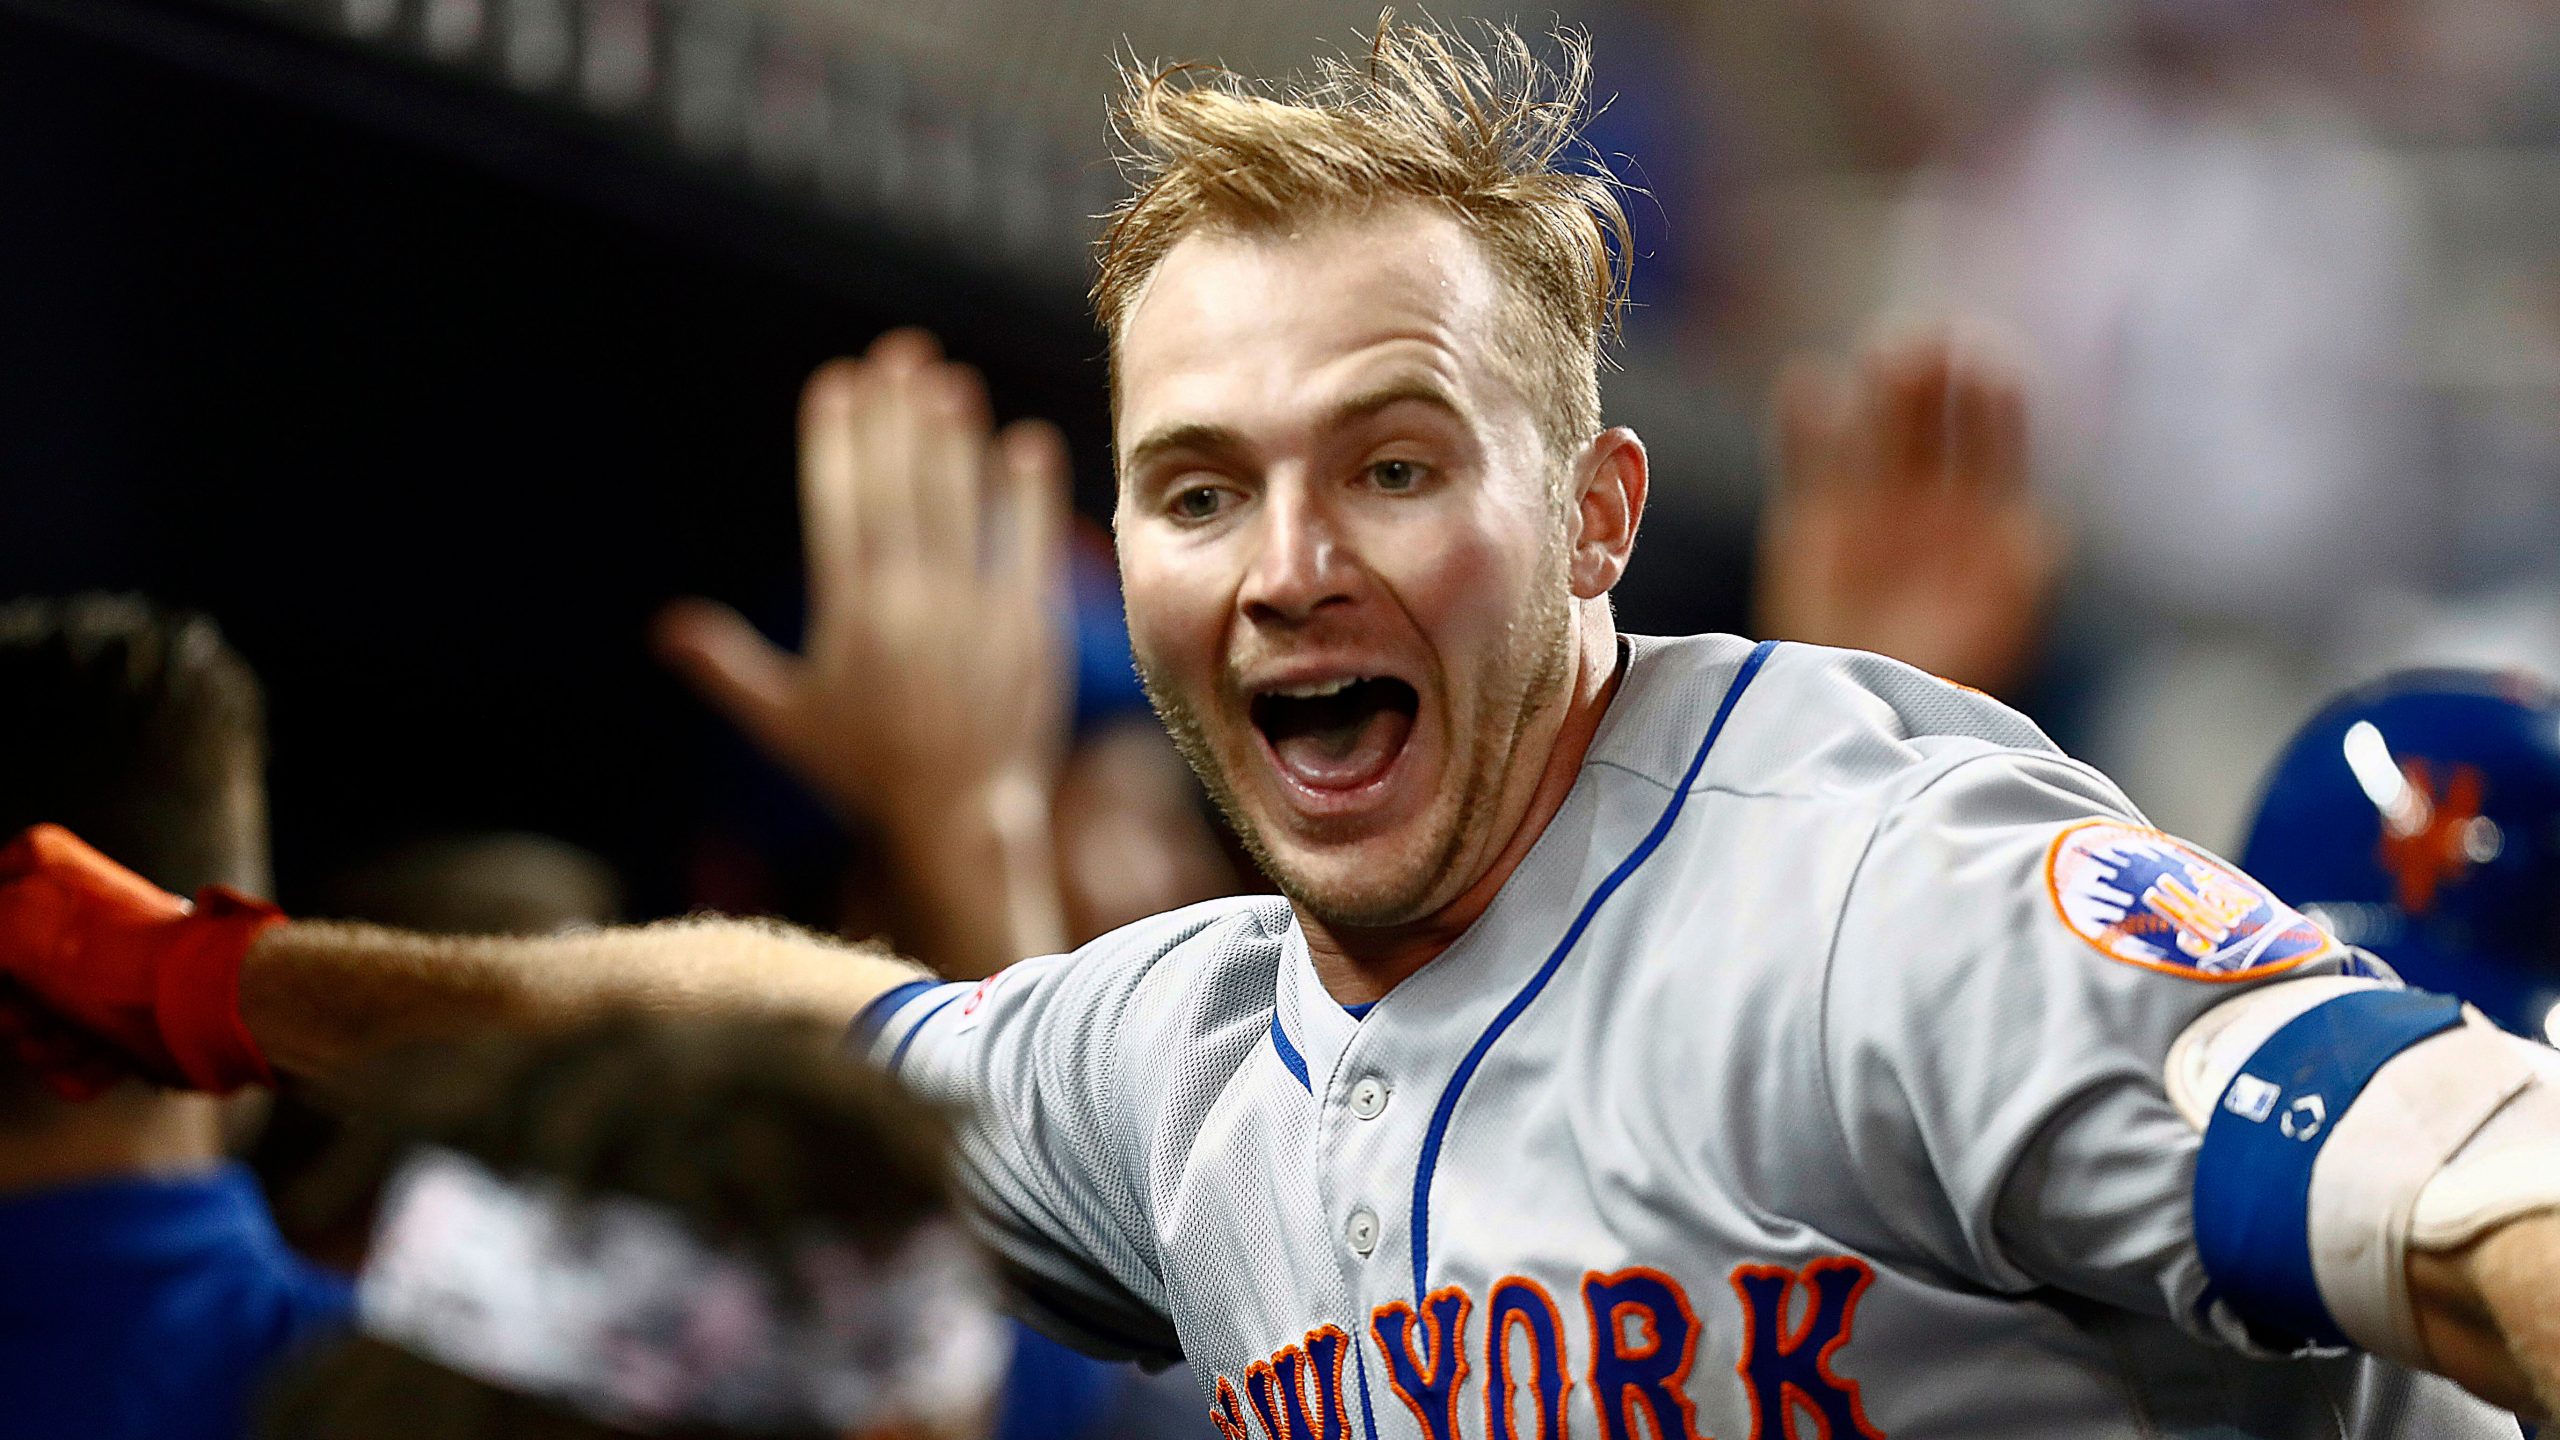 Pete-Alonso-New-York-Mets